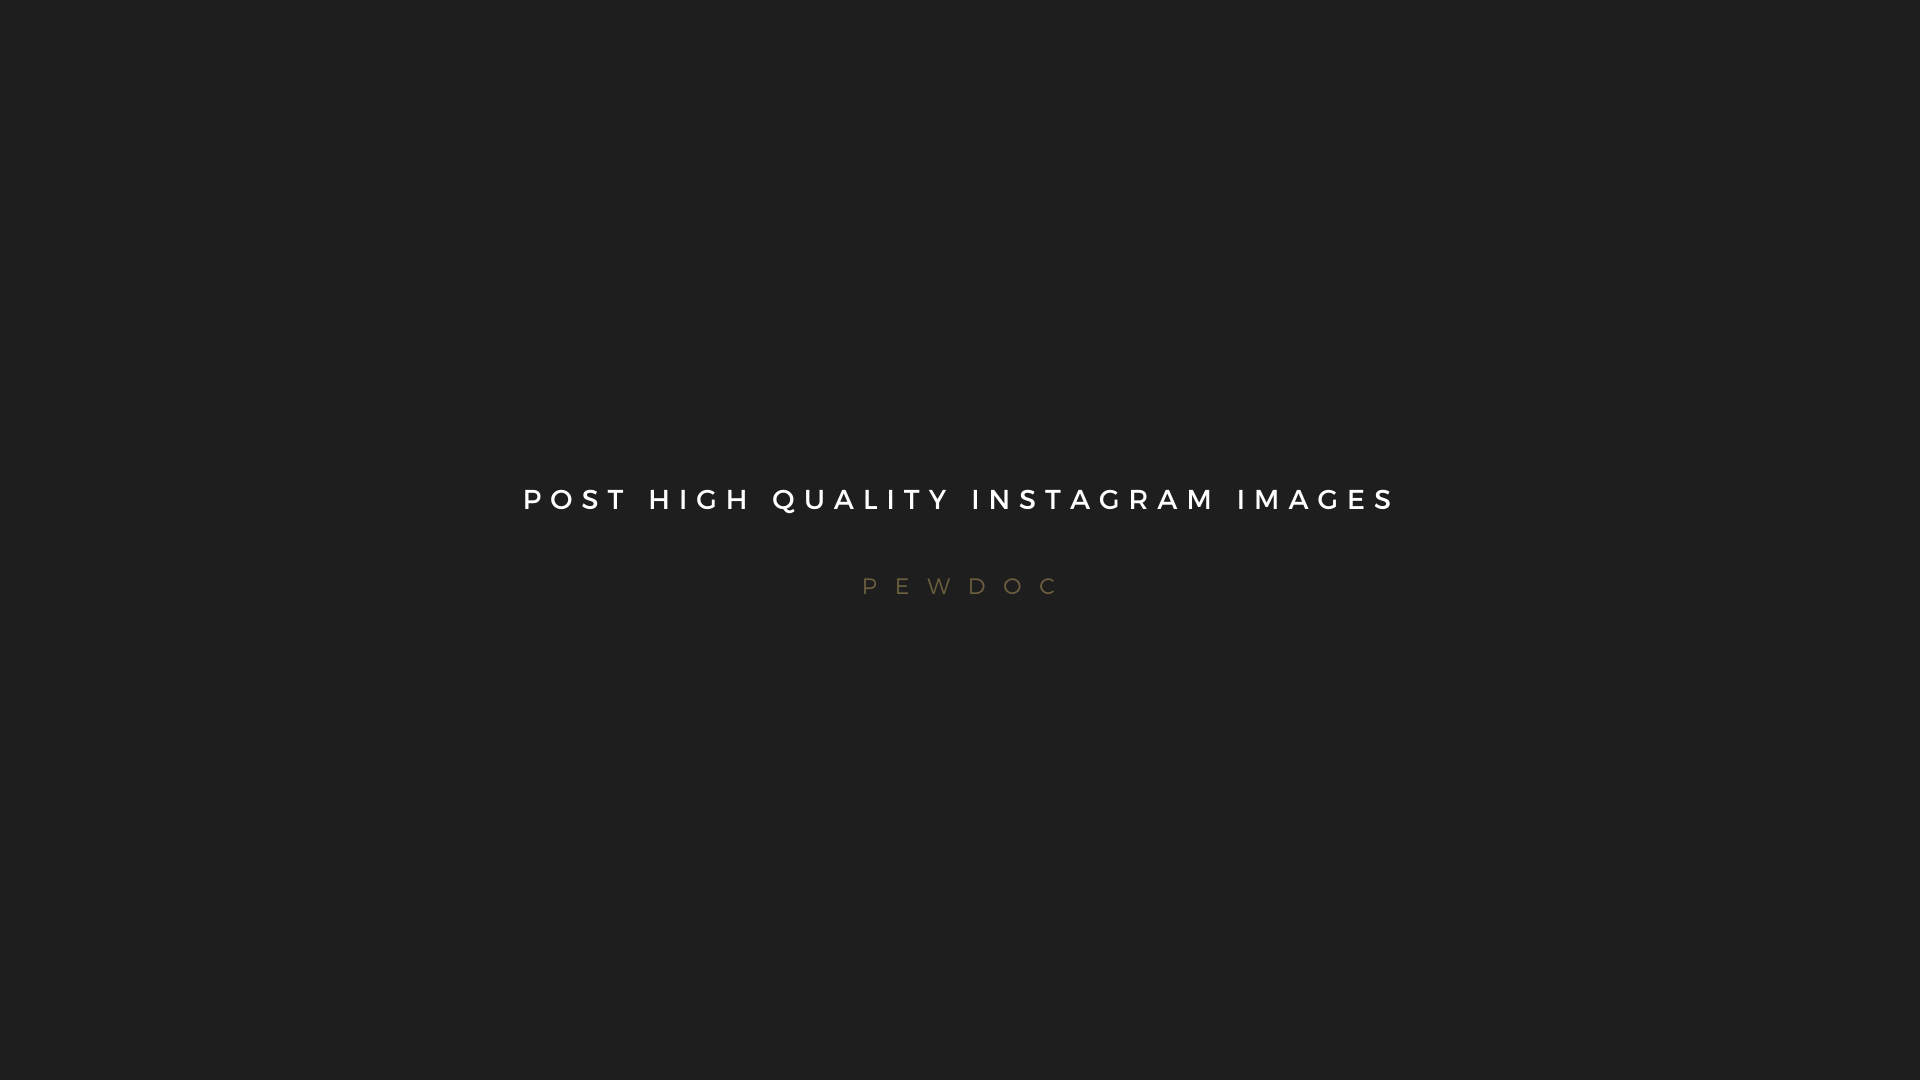 Post High Quality Instagram Images